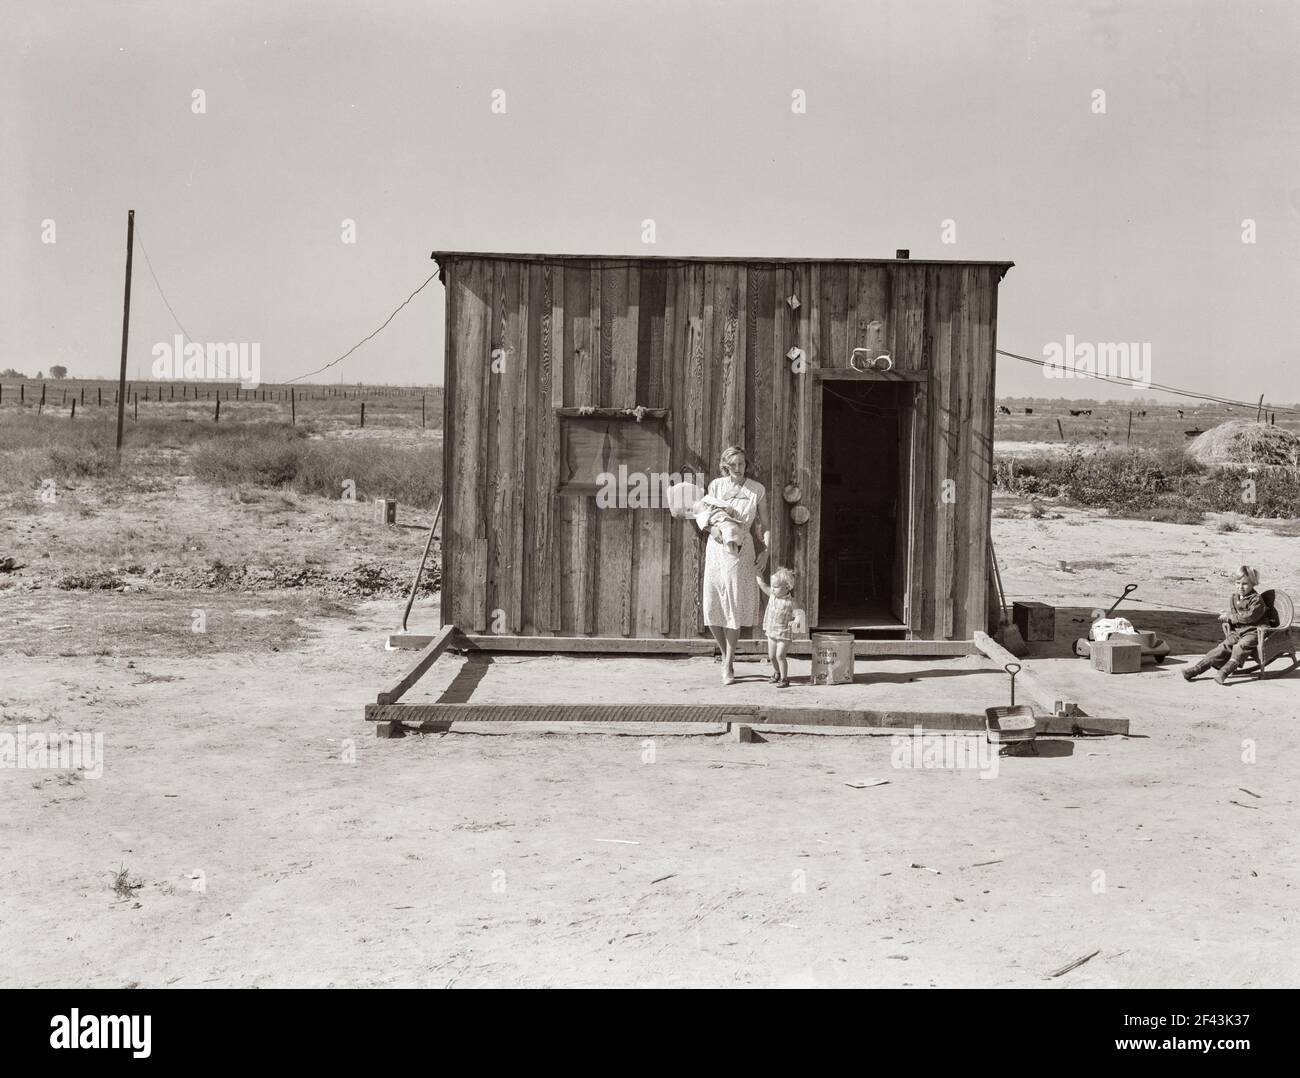 Home of rural rehabilitation client, Tulare County, California. They bought twenty acres of raw unimproved land with a first payment of fifty dollars which was money saved out of relief budget (August 1936). They received a Farm Security Administration (FSA) loan of seven hundred dollars for stock and equipment. Now they have a one-room shack, seven cows, three sows, and homemade pumping plant, along with ten acres of improved permanent pasture. Cream check approximately thirty dollars per month. Husband also works about ten days a month outside the farm. Photograph by Dorothea Lange. Stock Photo